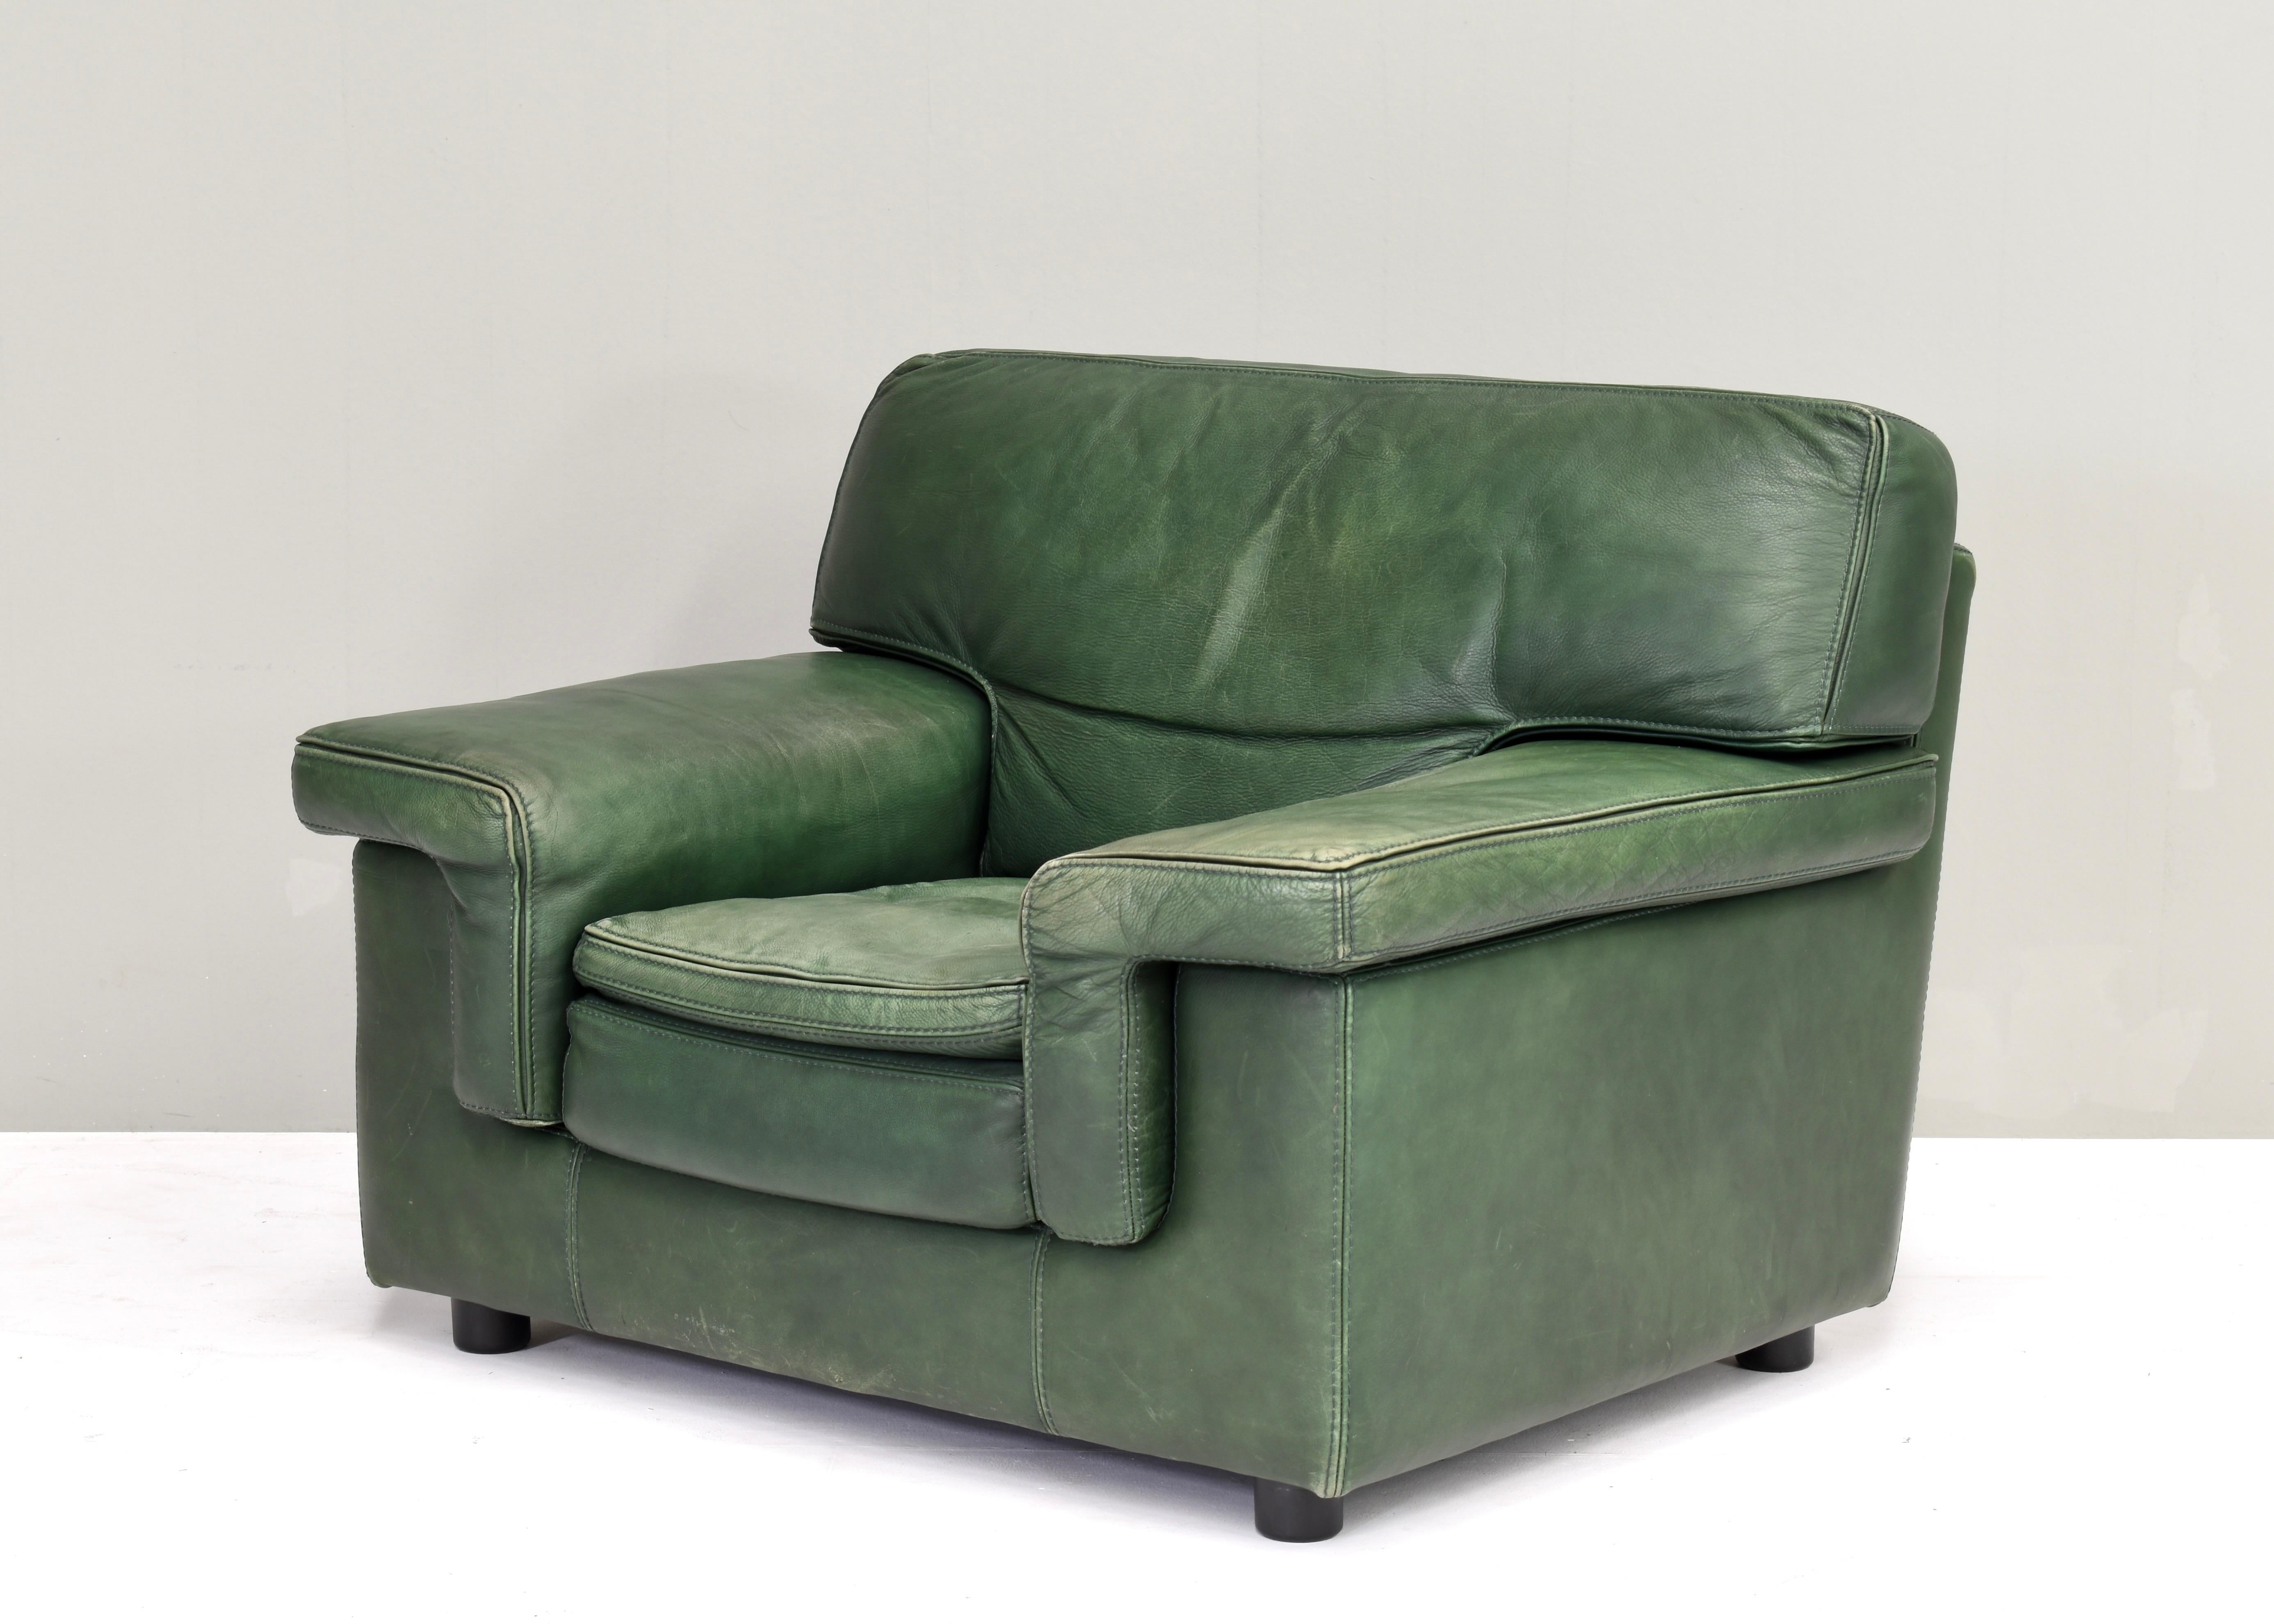 Very comfortable lounge chair by Roche Bobois, France / Italy – circa 1970.
The leather has nice patina with normal signs of age and use. No tears or holes.
The chair is labeled Roche Bobois, Italy. Although Roche Bobois is a French company some